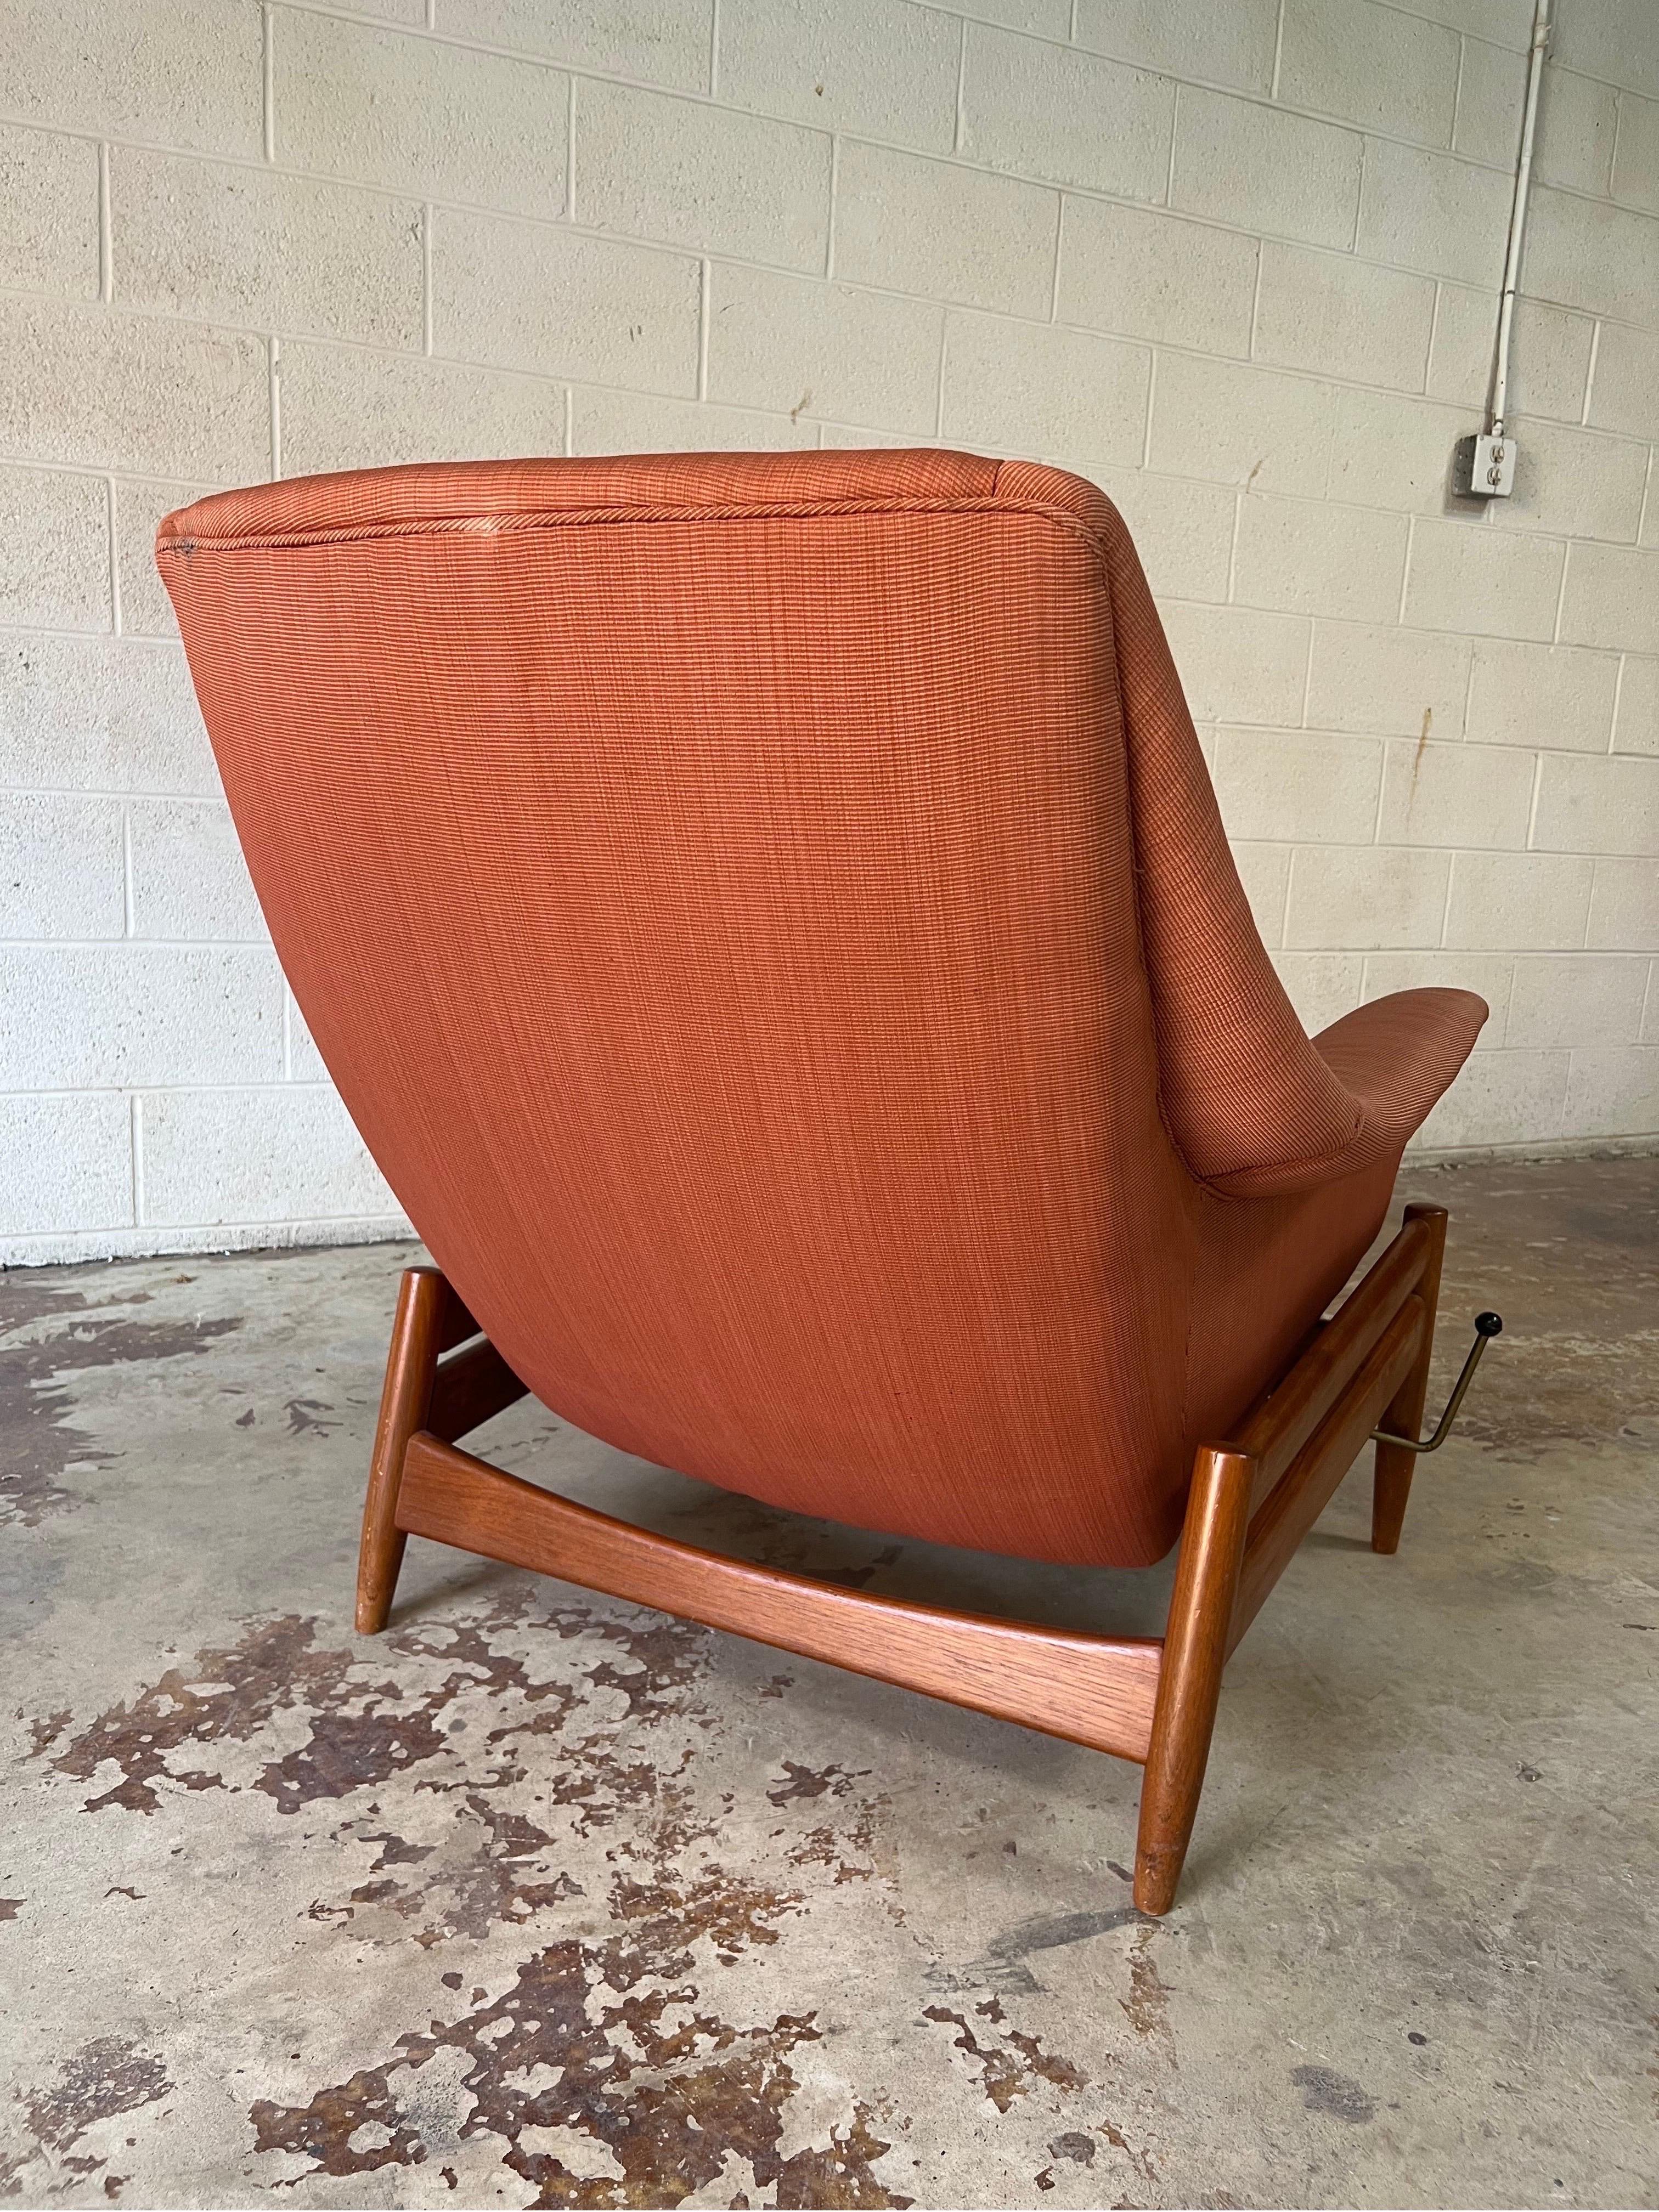 Mid-20th Century Recliner by L.K. Hjelle, Norway circa 1960’s